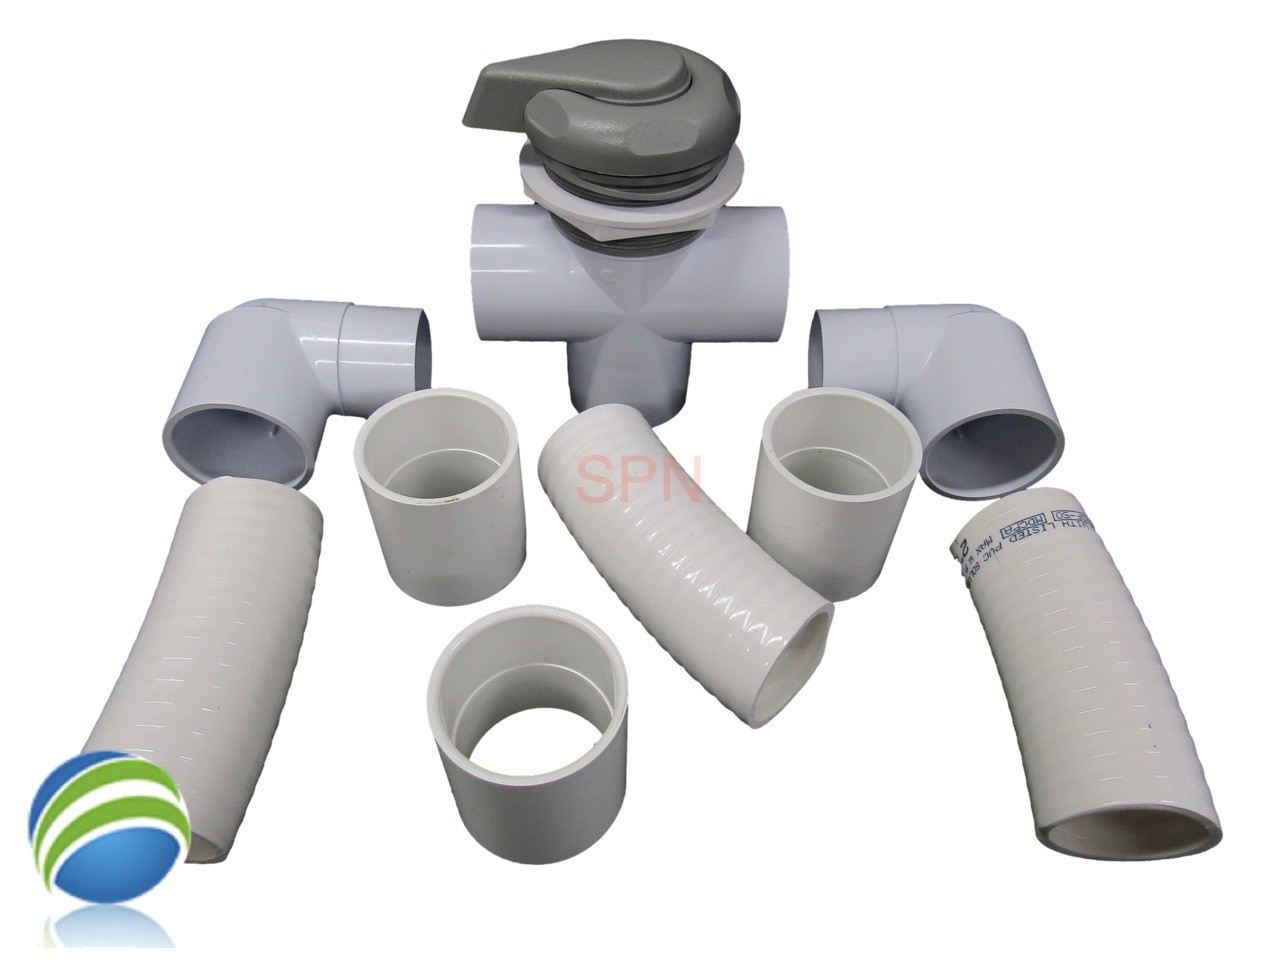 Diverter Valve Kit 3 3/4" Wide Cap Gray Hot Tub Spa 2" x 2" x 2" How To Video
This valve accepts 2" pipe or fittings which would measure about 2 3/8" outside Diameter of the pipe and 2 3/8" inside Diameter of the Valve..